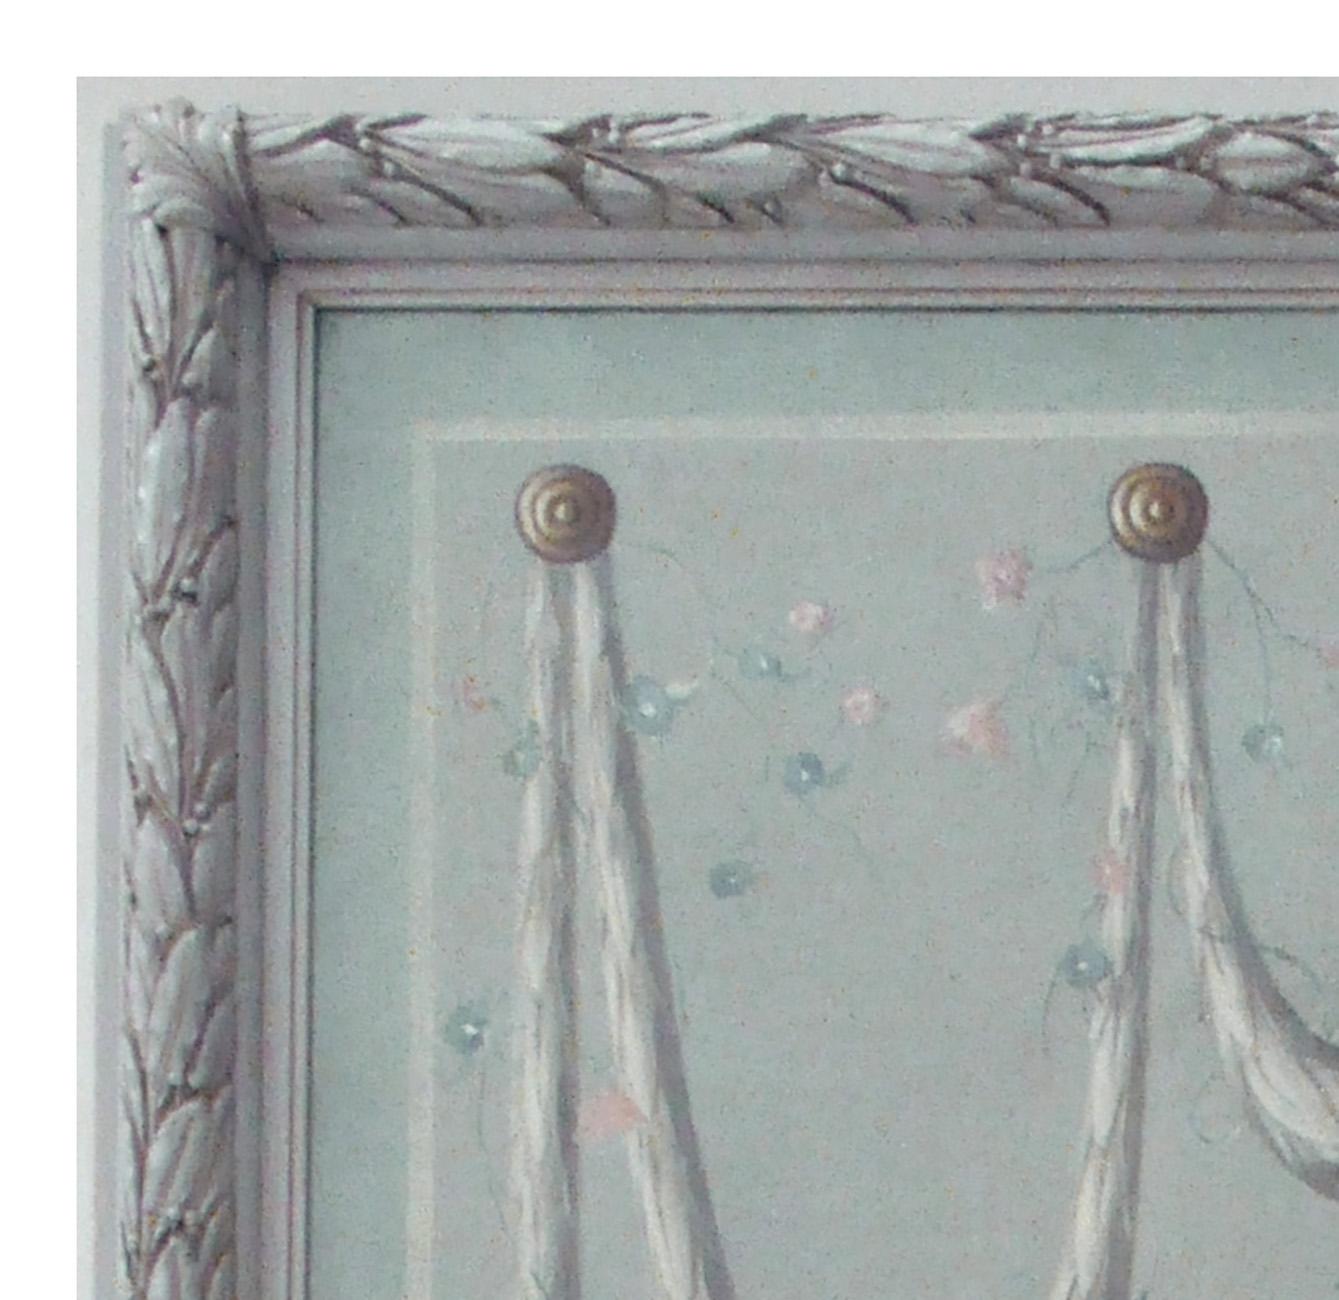 Grotesque - Carlo De Tommasi Italia 2012 - Oil on canvas cm. 130 x 80. 
Peral grey laquared wooden frame cm. 150 x 100
The painting created by the painter Carlo De Tommasi is in neoclassical style with central medallion and floral vase.The